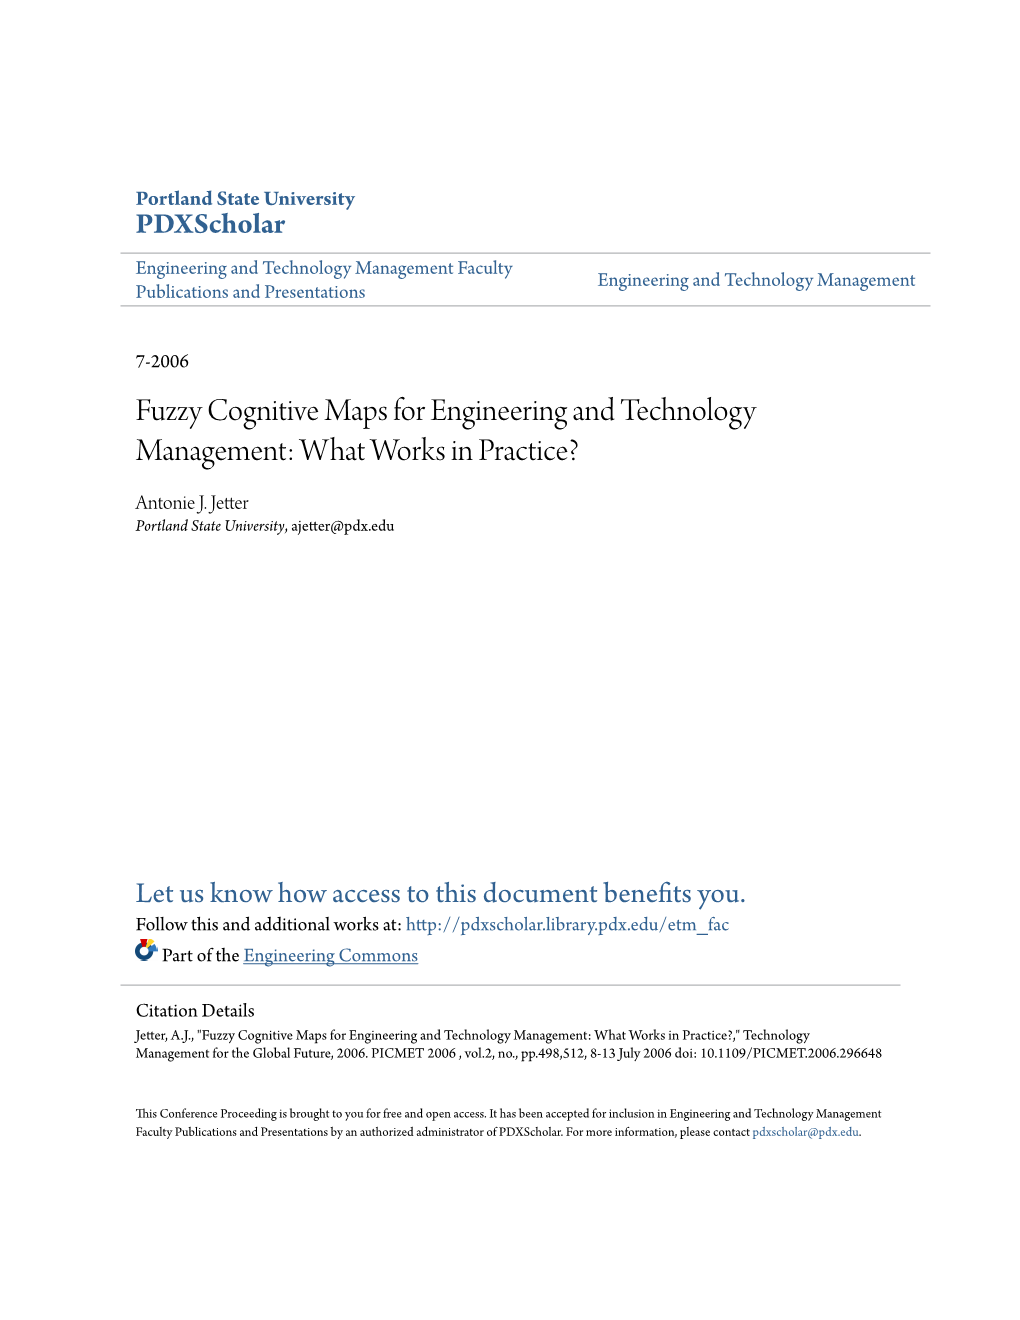 Fuzzy Cognitive Maps for Engineering and Technology Management: What Works in Practice?